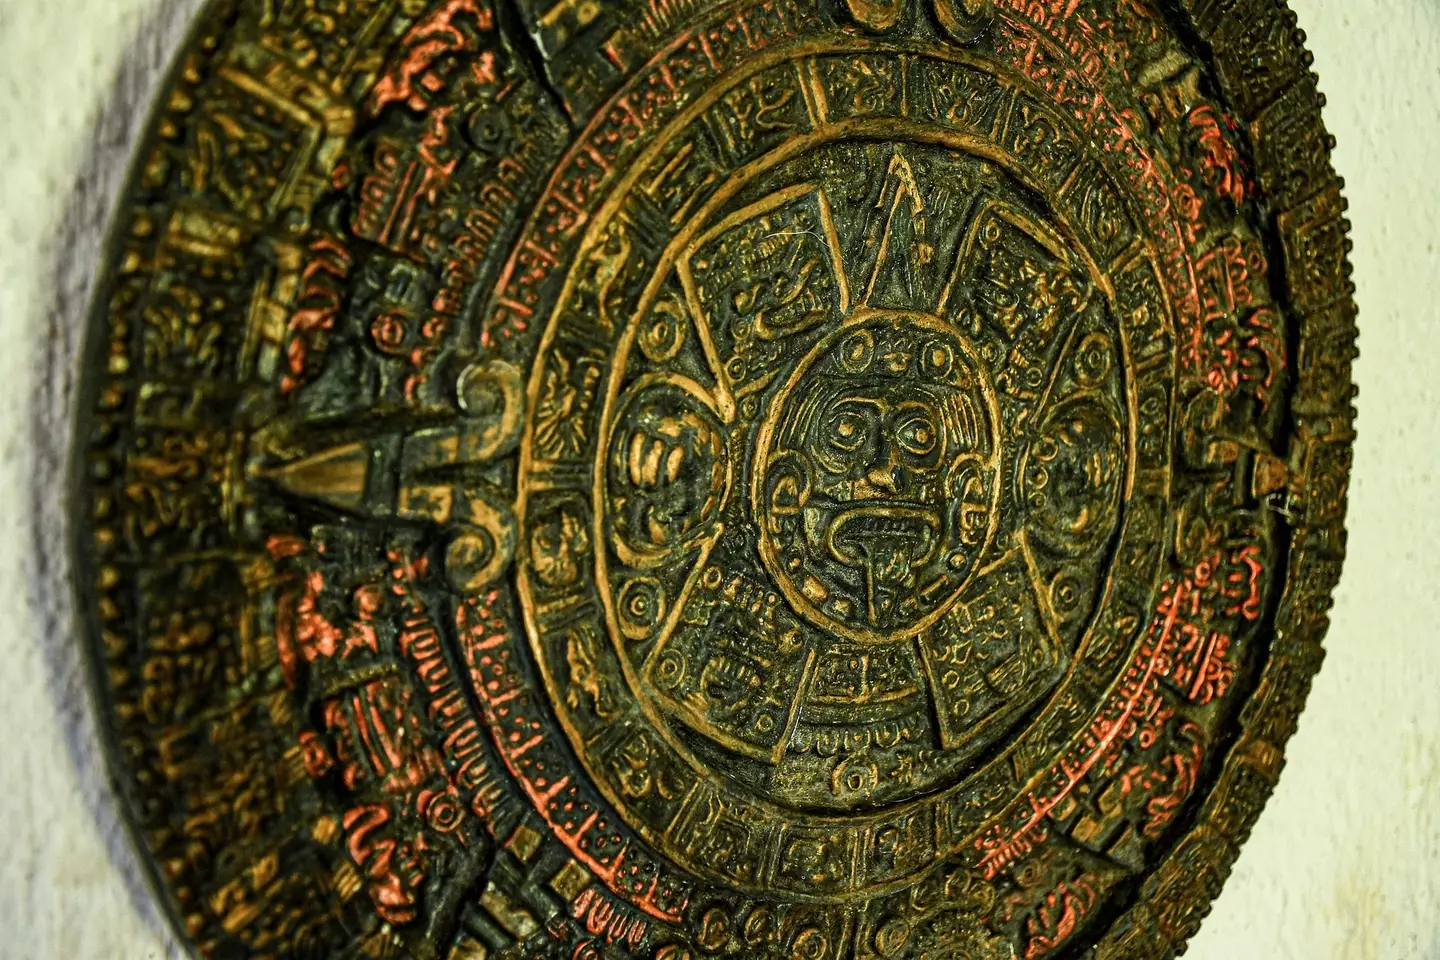 The Mayan Calendar predicted the world would end 10 years ago.